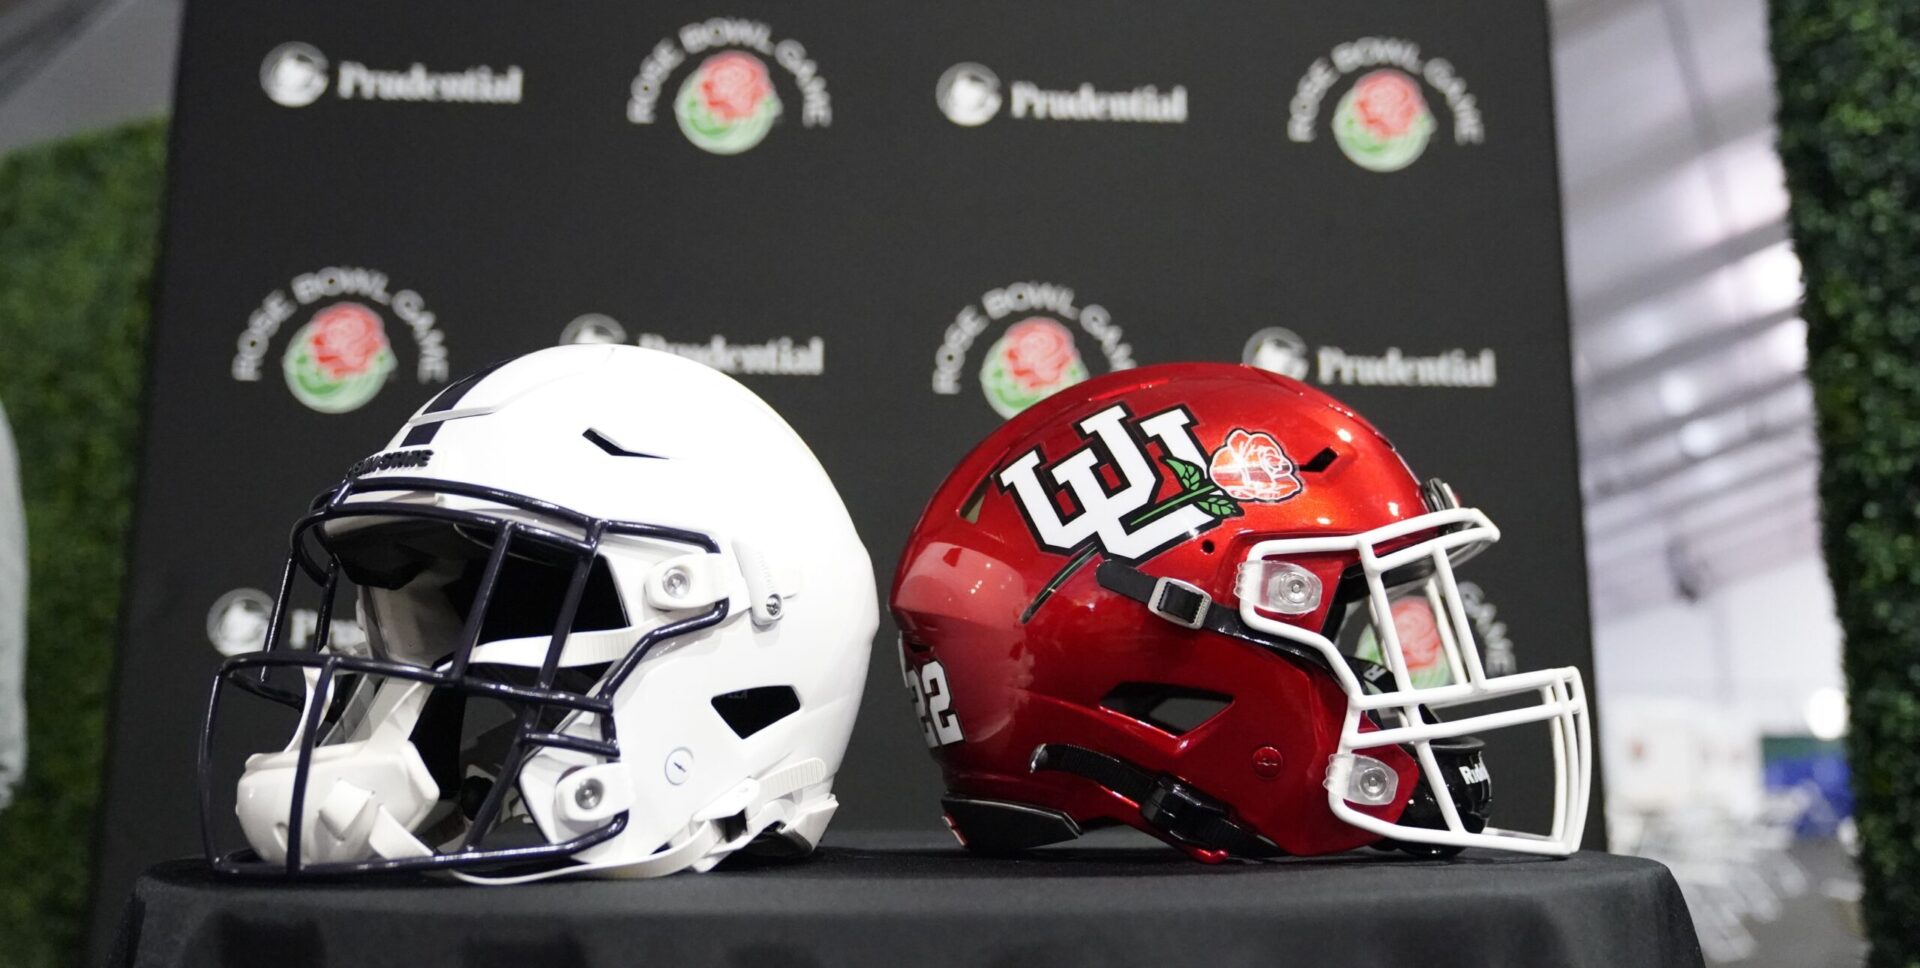 The Utah and Penn State helmets are placed together during media day ahead of the Rose Bowl NCAA college football game Saturday, Dec. 31, 2022, in Pasadena, Calif.